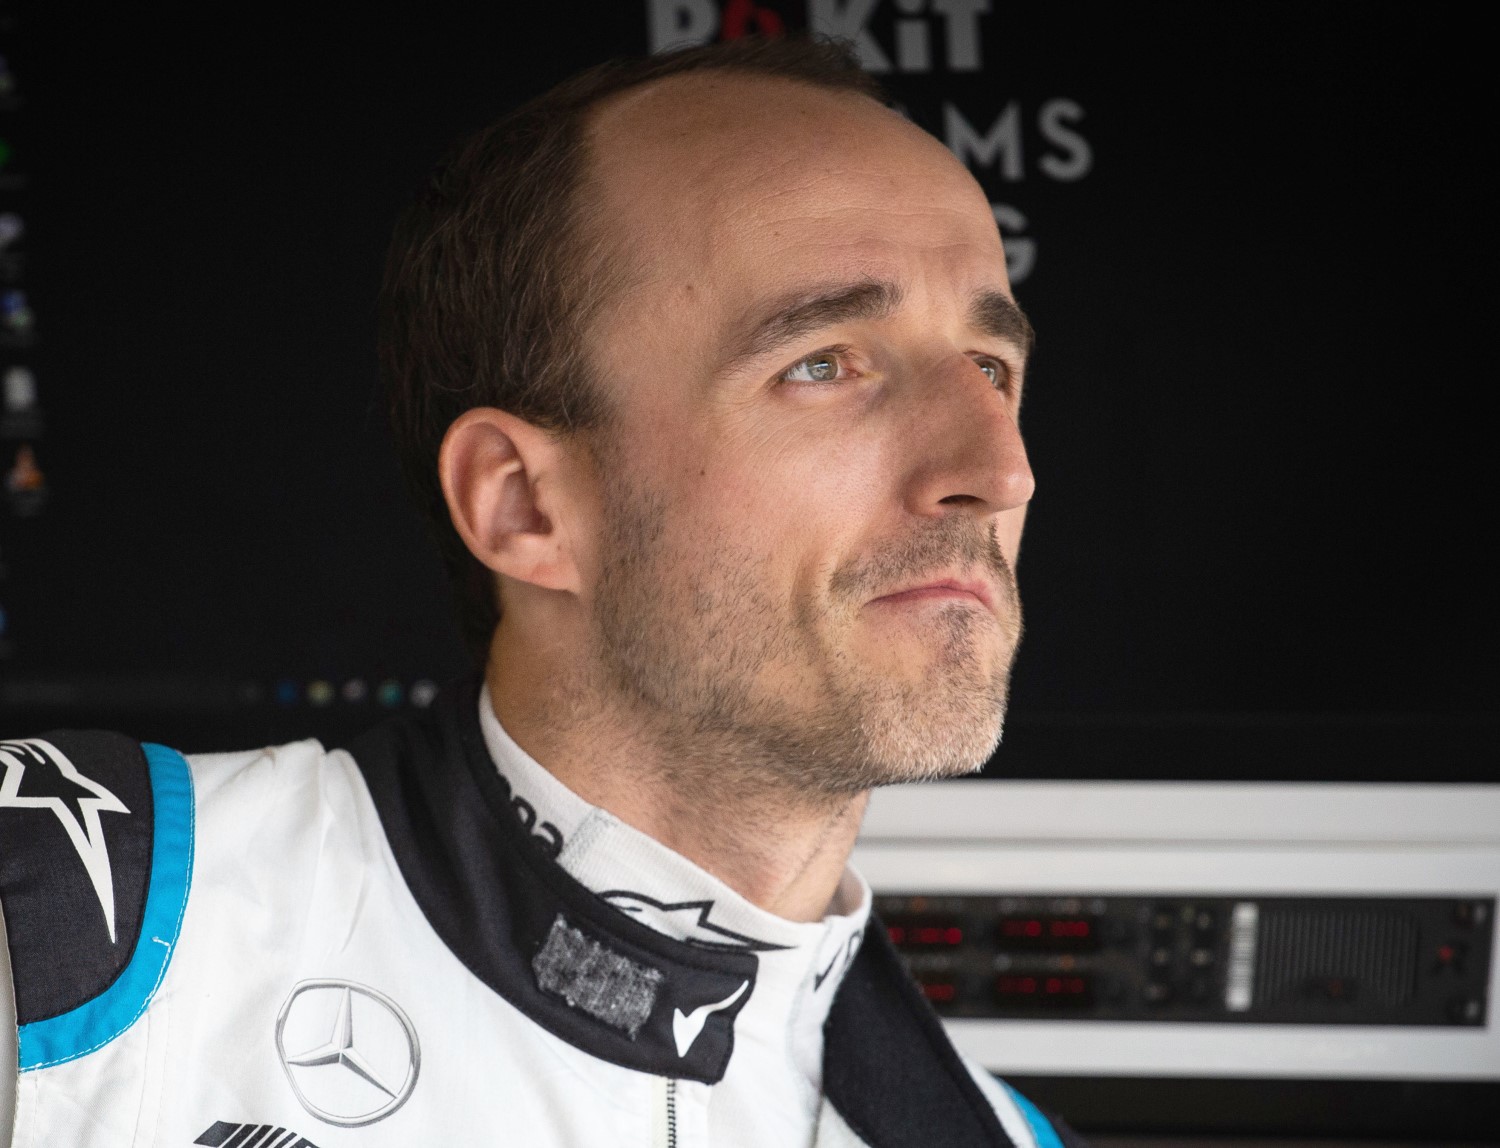 Robert Kubica gets 5 outings for his check